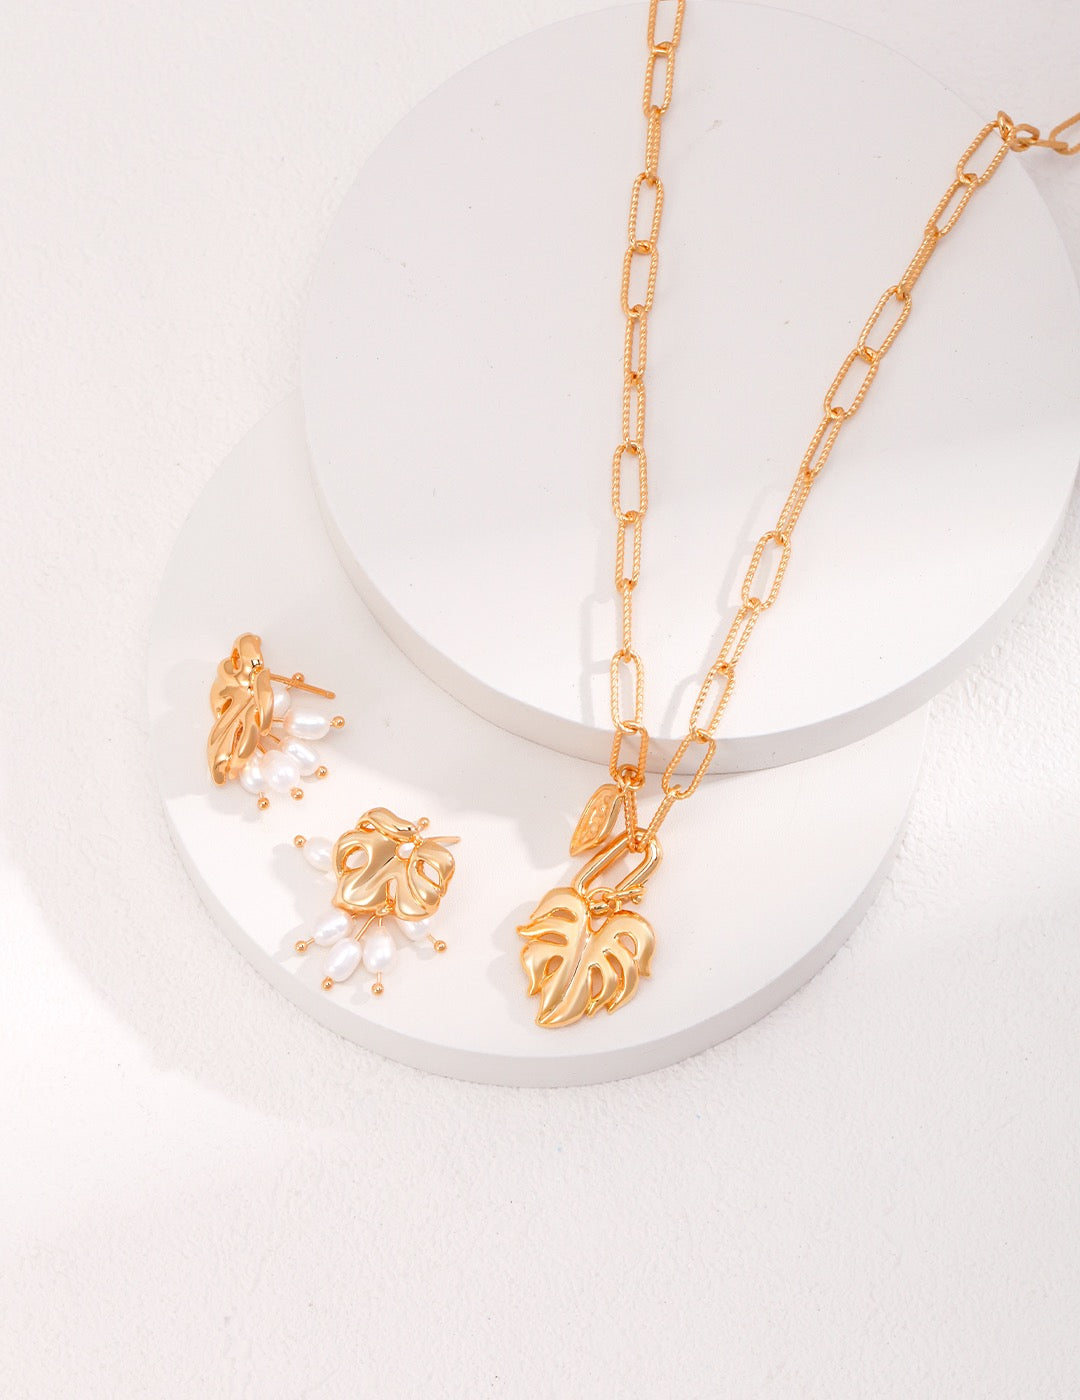 Vintage Gold 'Naturaleaf' Necklace - Nature-Inspired Jewelry